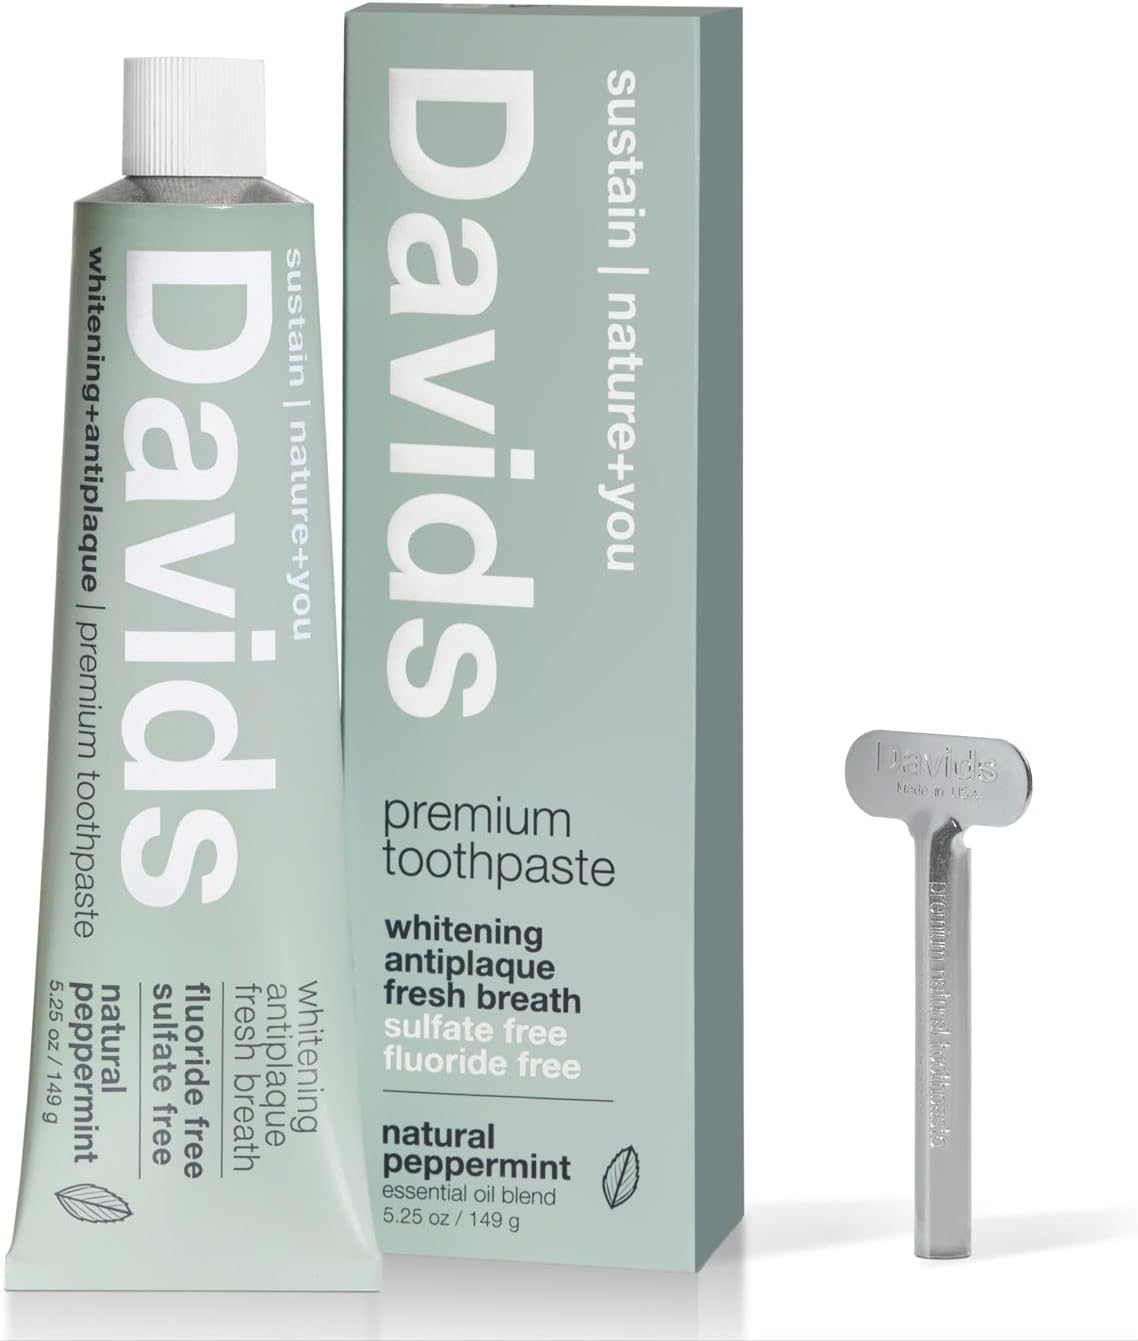 Davids Natural Toothpaste for Teeth Whitening, Peppermint, Antiplaque, Fluoride Free, SLS Free, EWG Verified, Toothpaste Squeezer Included, Recyclable Metal Tube, 5.25oz